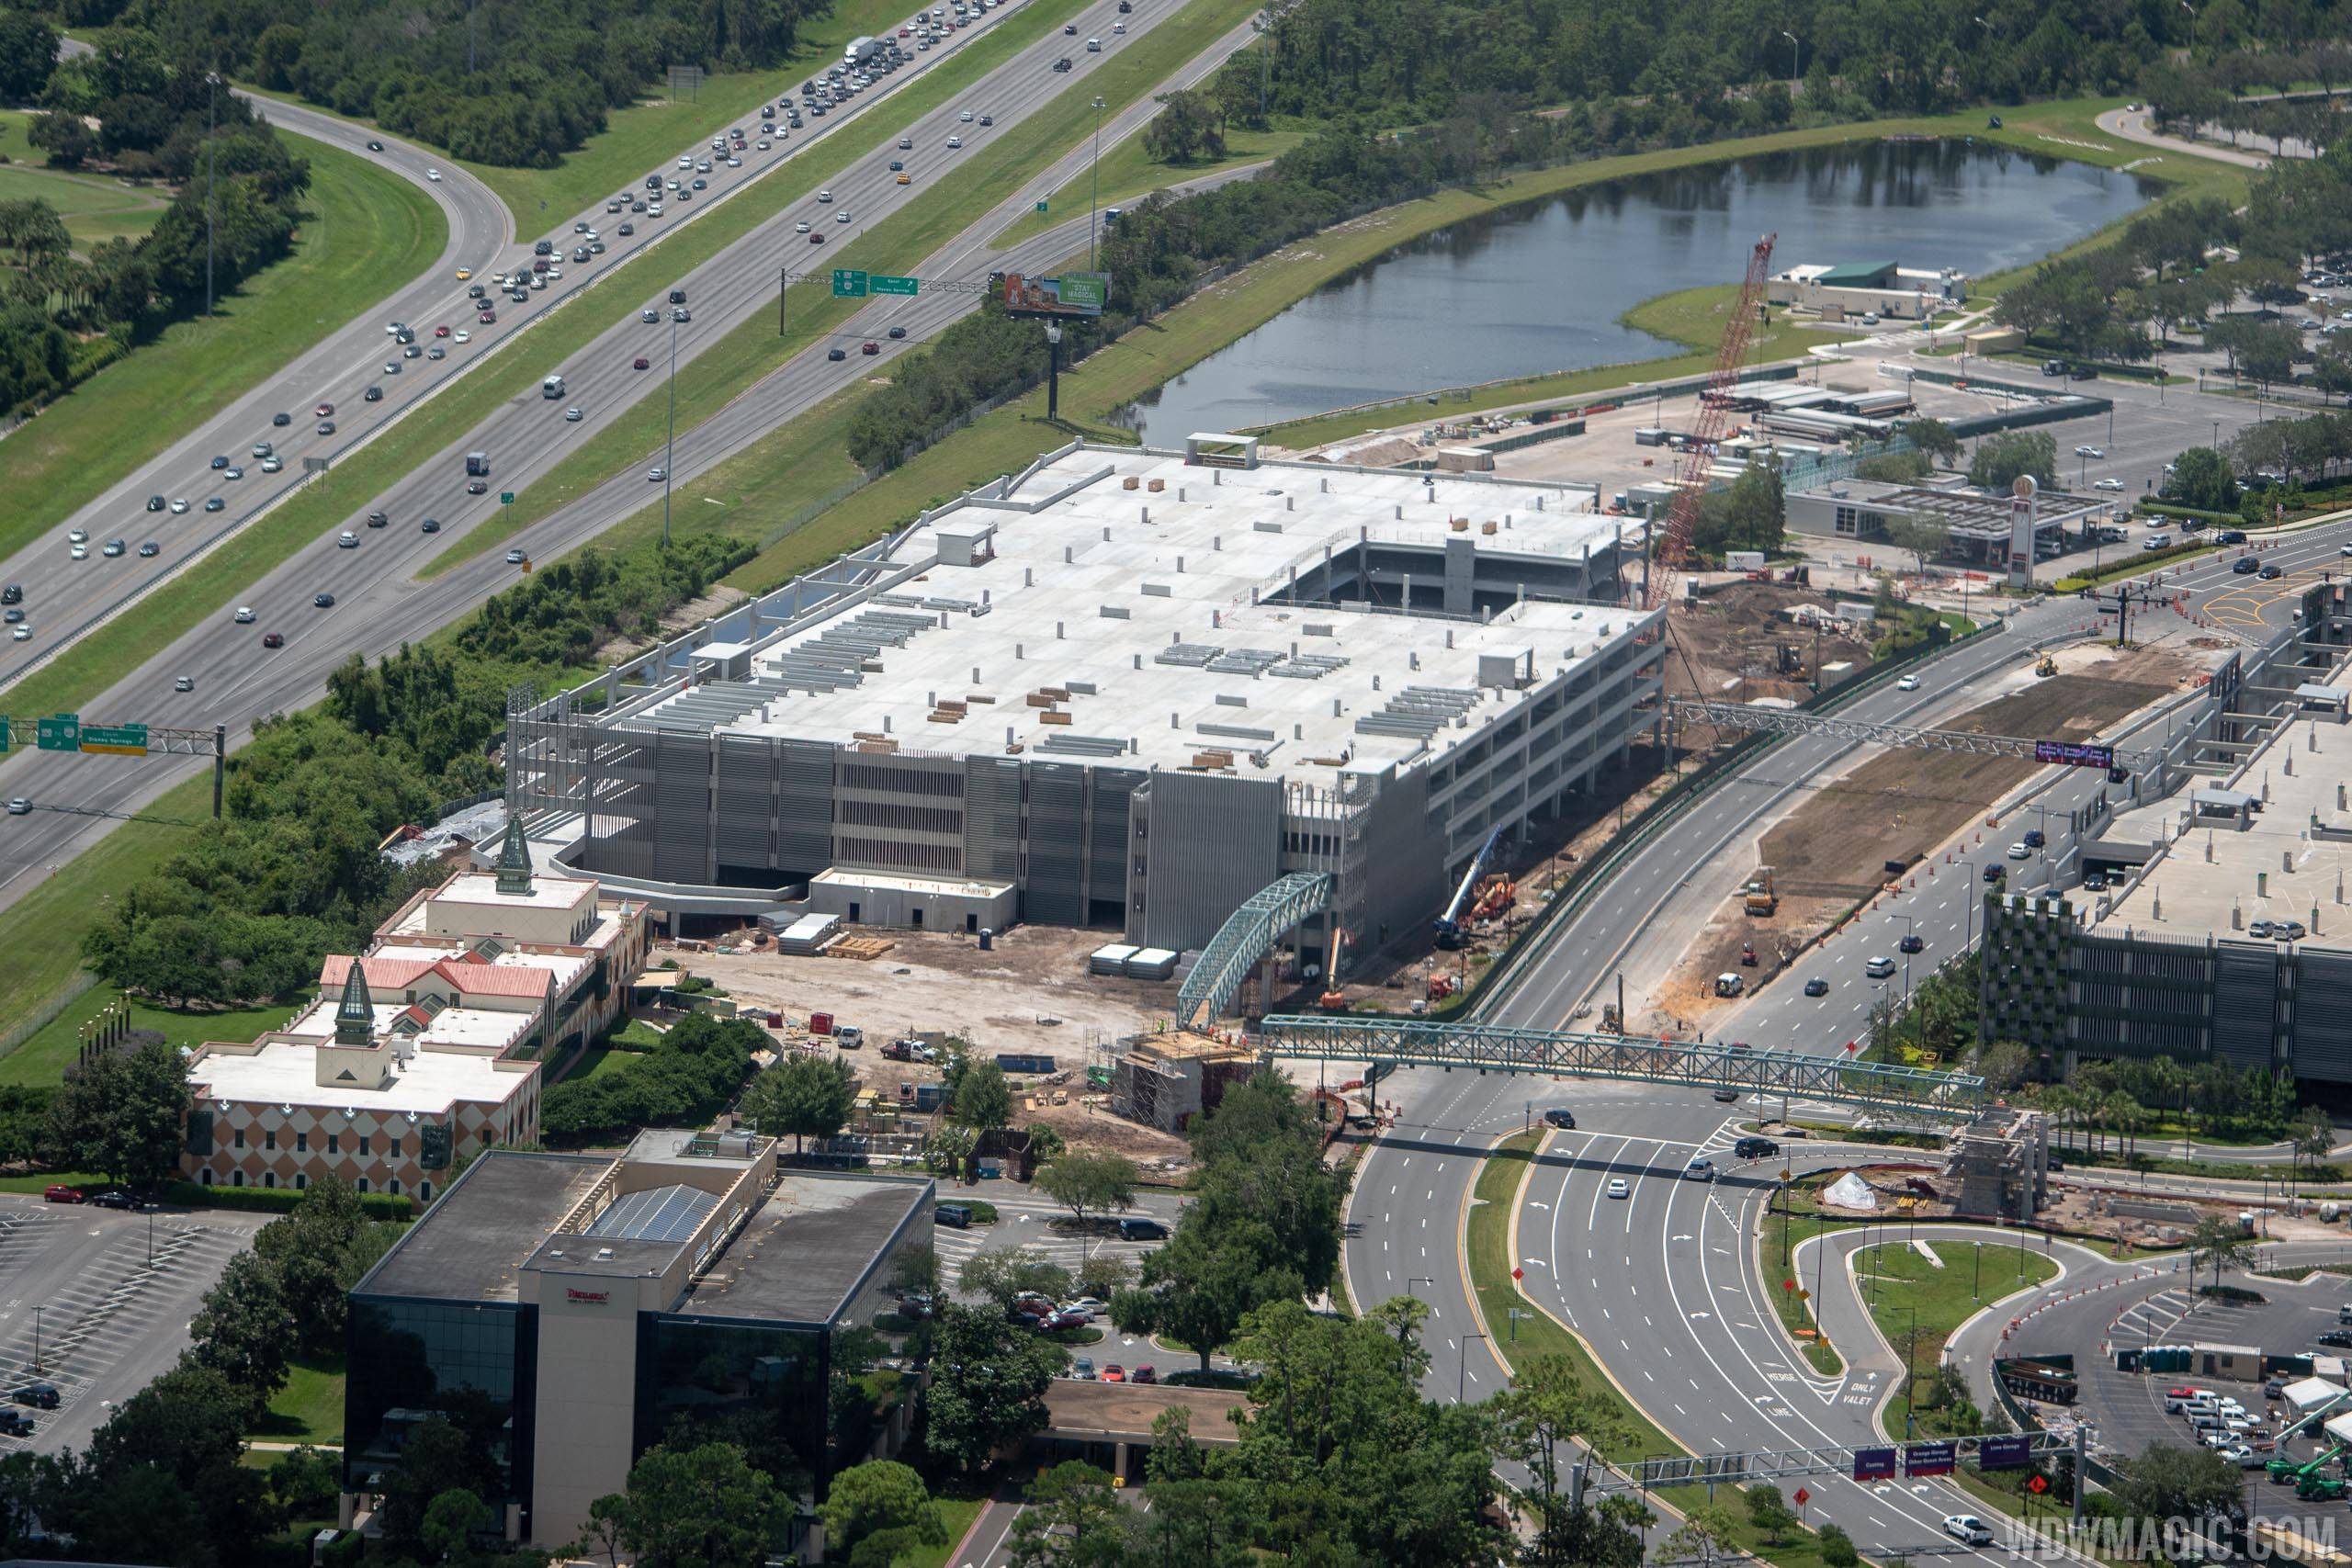 PHOTOS - Third parking garage at Disney Springs nears completion